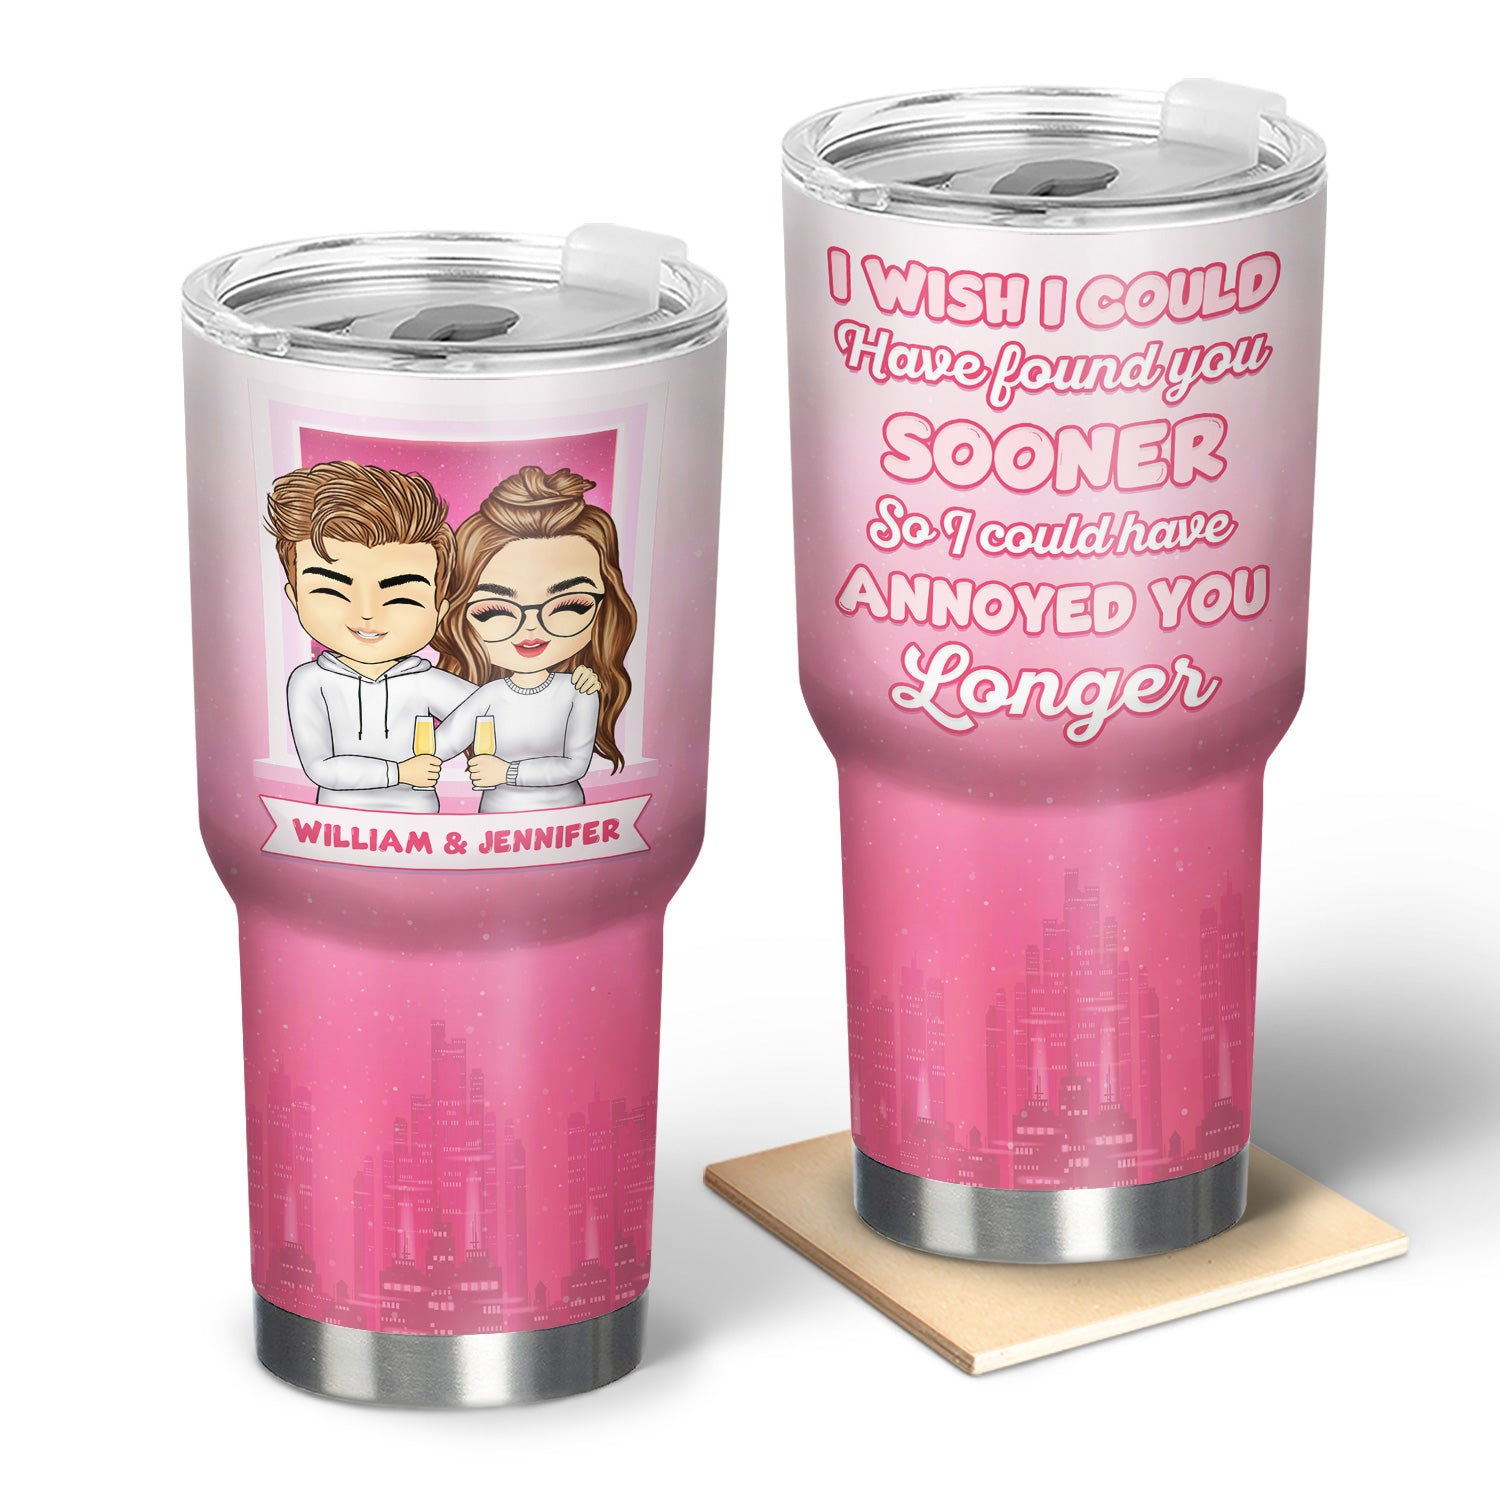 Chibi Could Have Annoyed You Longer - Gift For Couples - Personalized Custom 30 Oz Tumbler